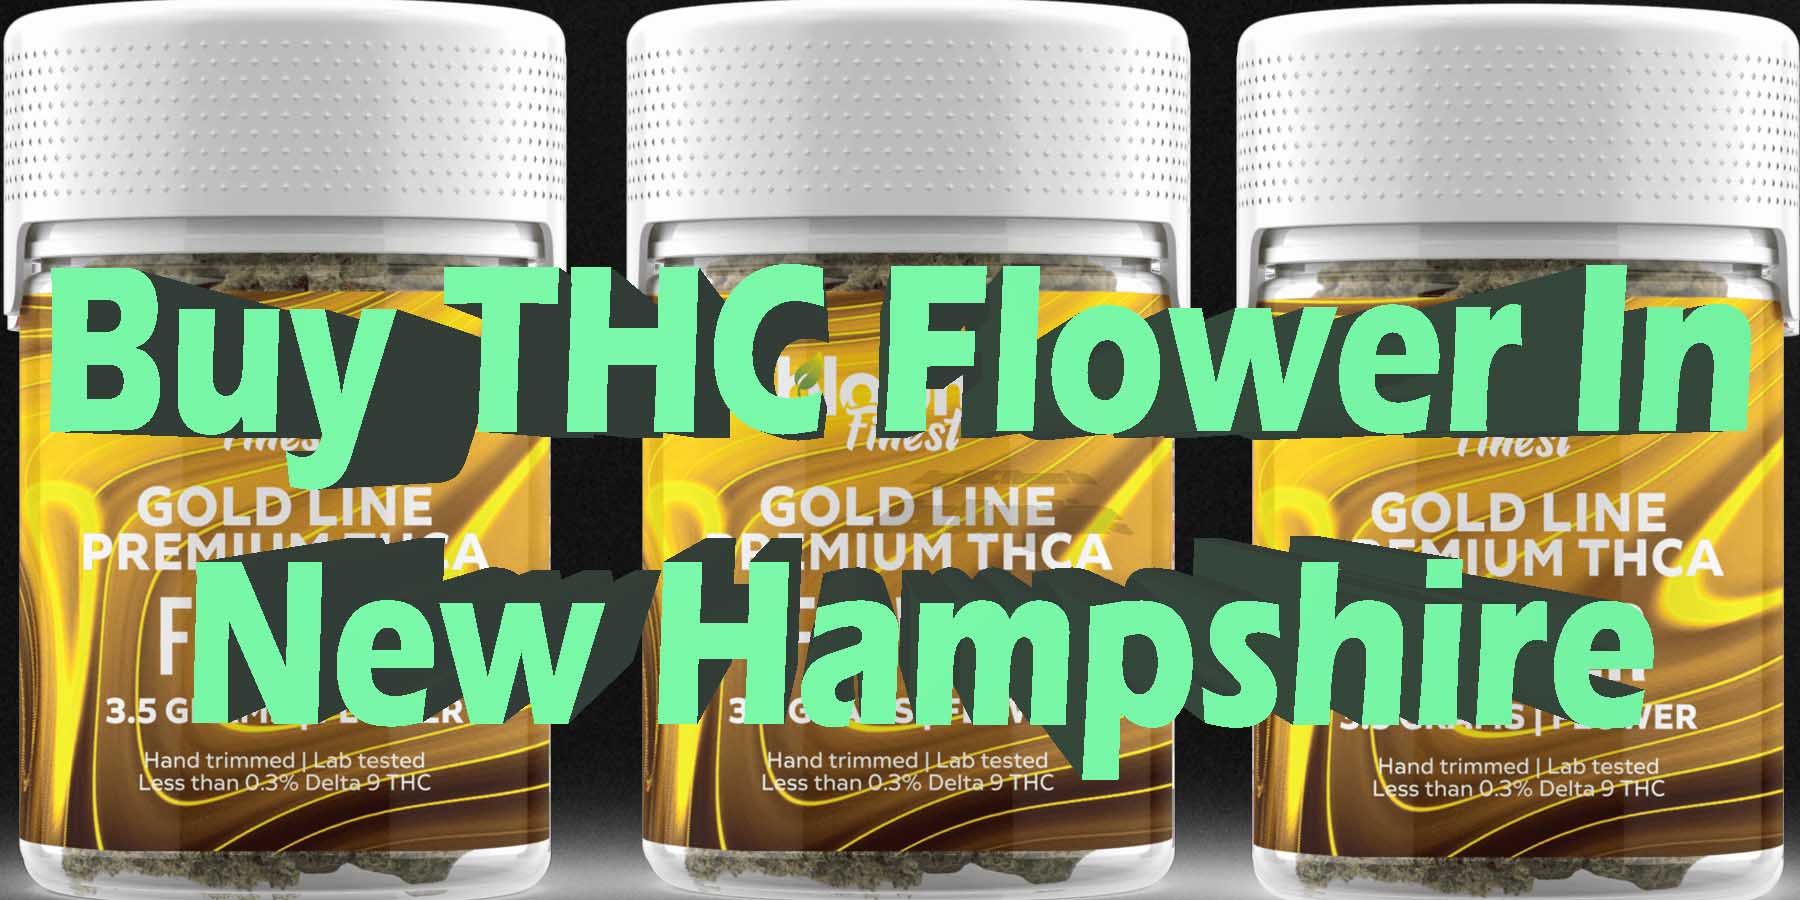 Buy THC Flower In New Hampshire WhereToGet HowToGetNearMe BestPlace LowestPrice Coupon Discount For Smoking Best High Smoke Shop Online Near Me StrongestBrand BestBrand Binoid